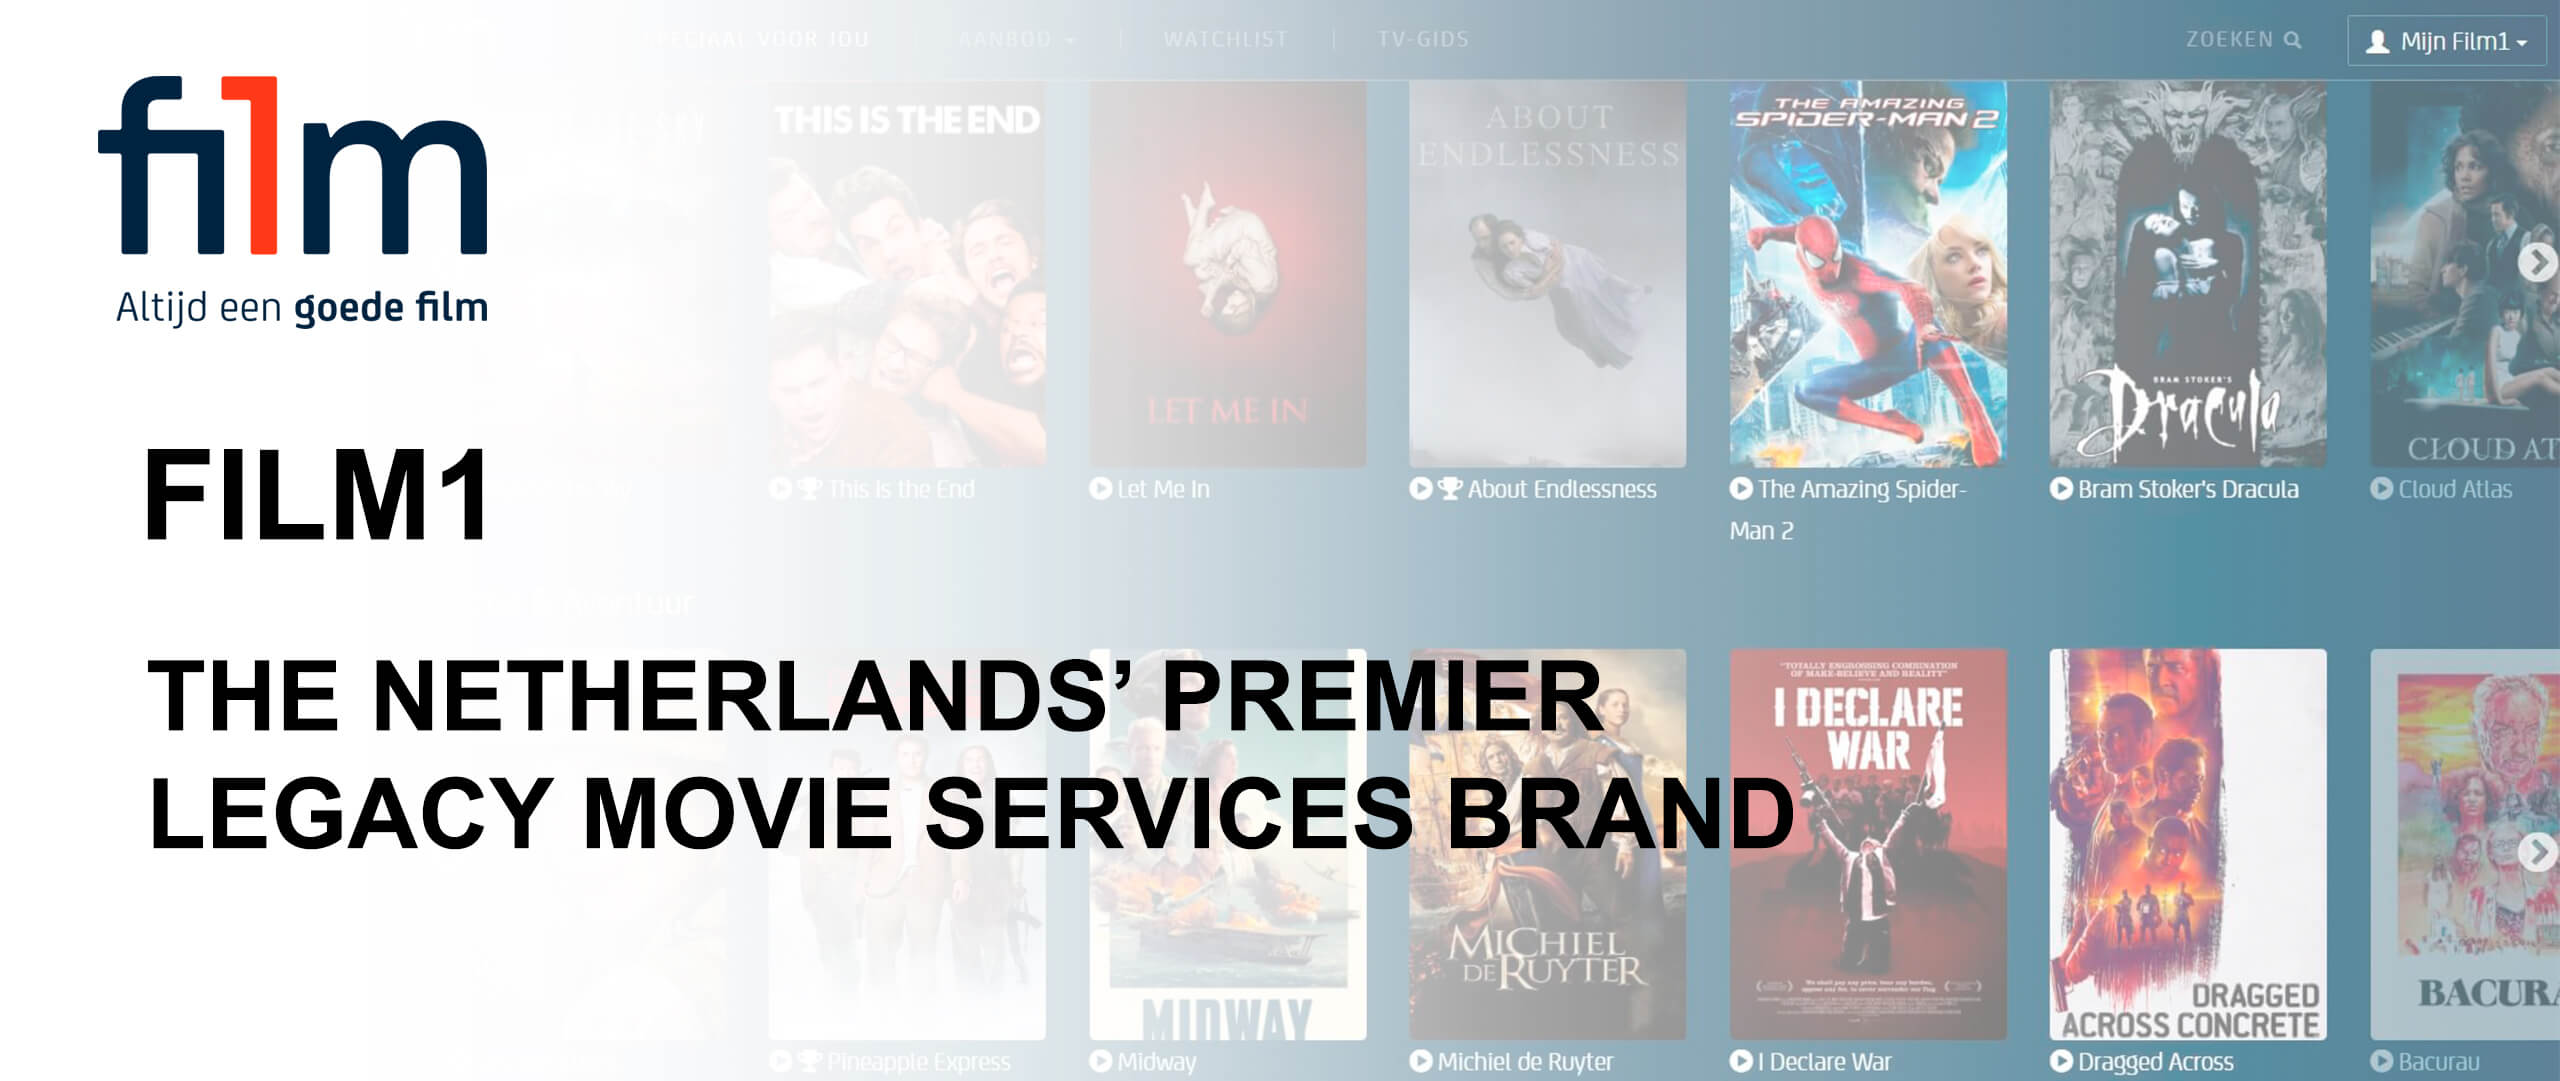 THE NETHERLANDS’ PREMIER LEGACY MOVIE SERVICES BRAND 